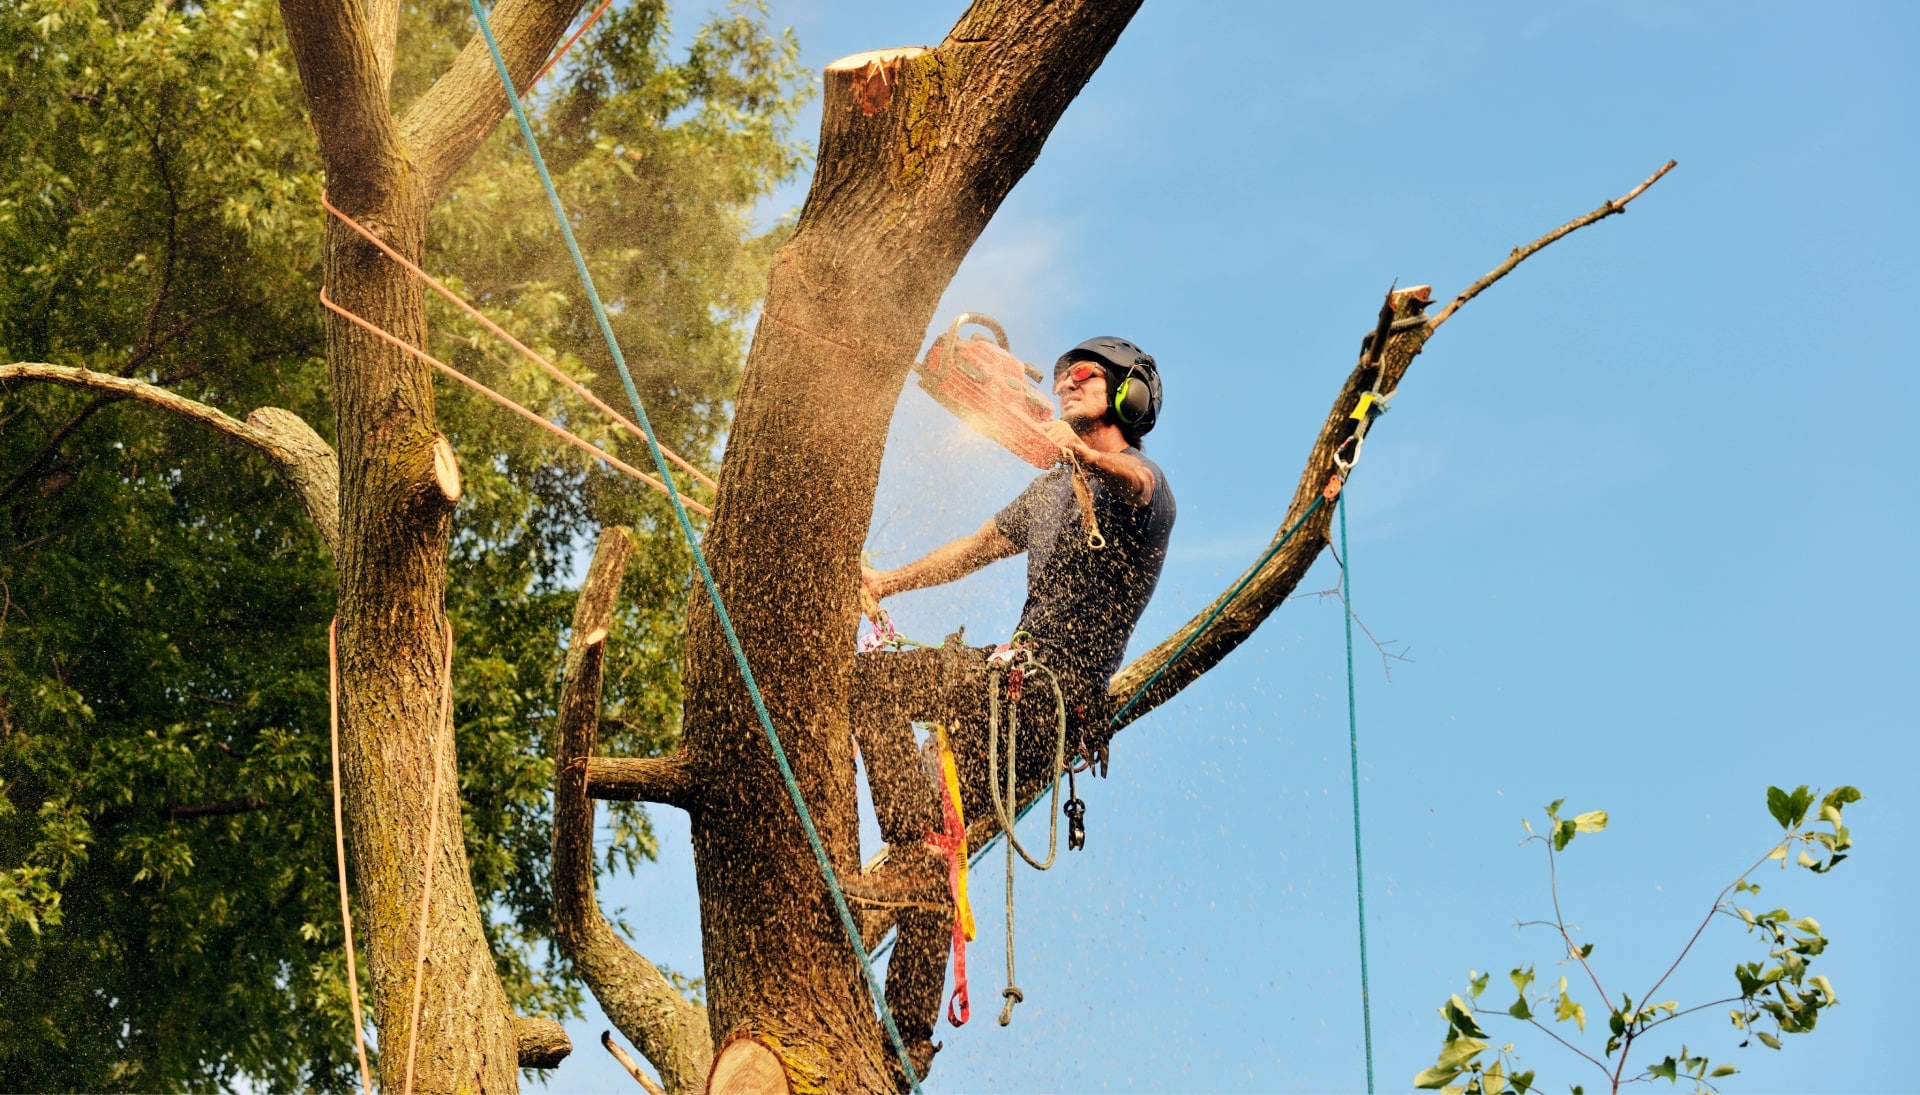 Kernersville tree removal experts solve tree issues.